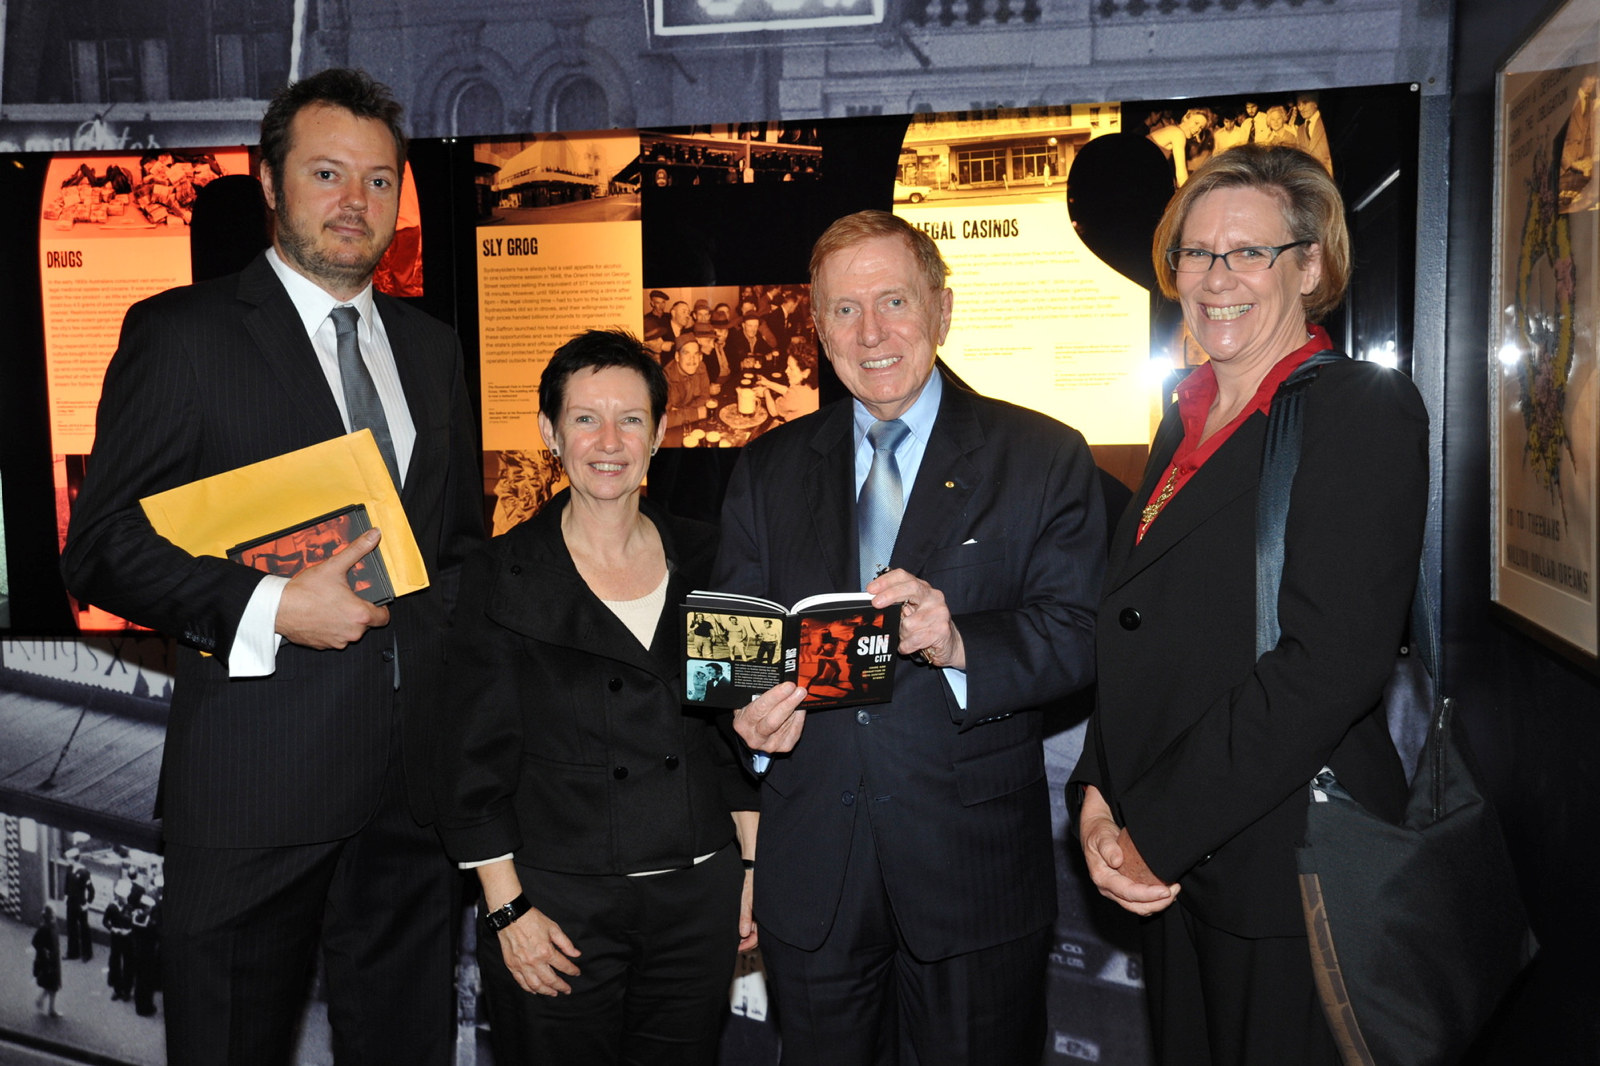 Tim Girling-Butcher, Michael Kirby, Kate Clark and guest at the Sin City Launch